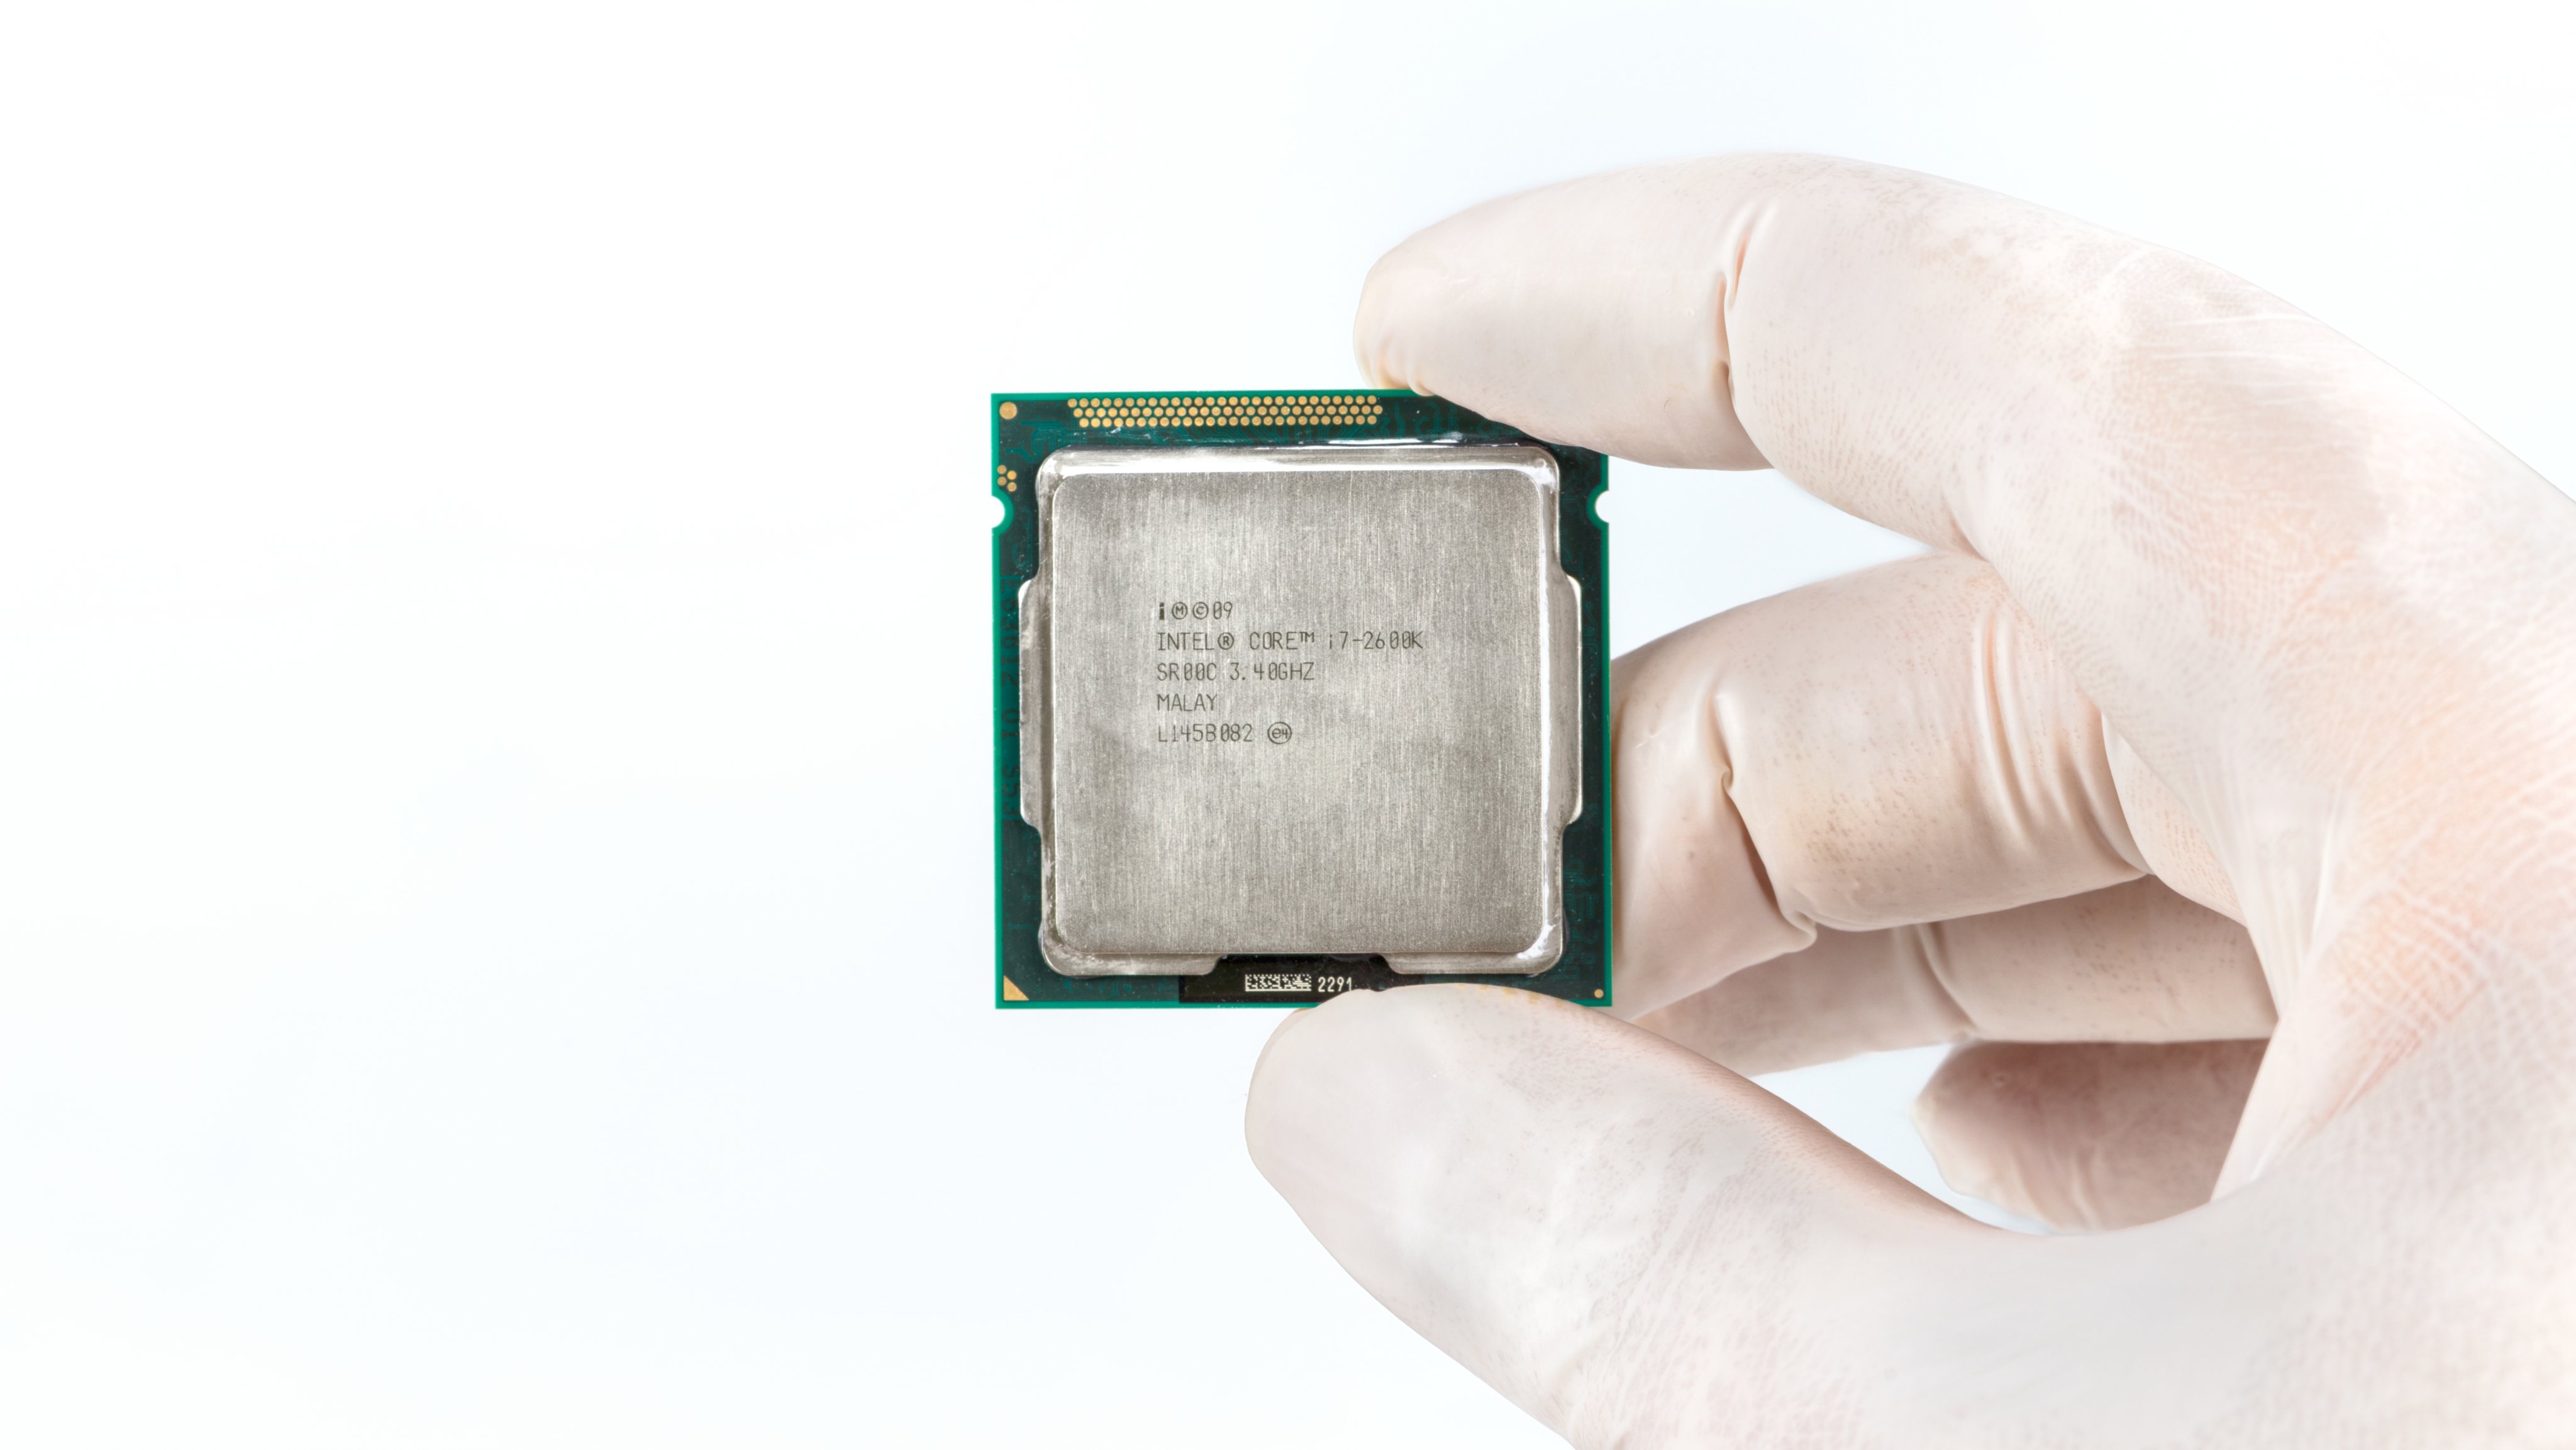 Modern central computer processors CPU isolated on white background.Intel Core i7-2600K SR00 3.40GHZ